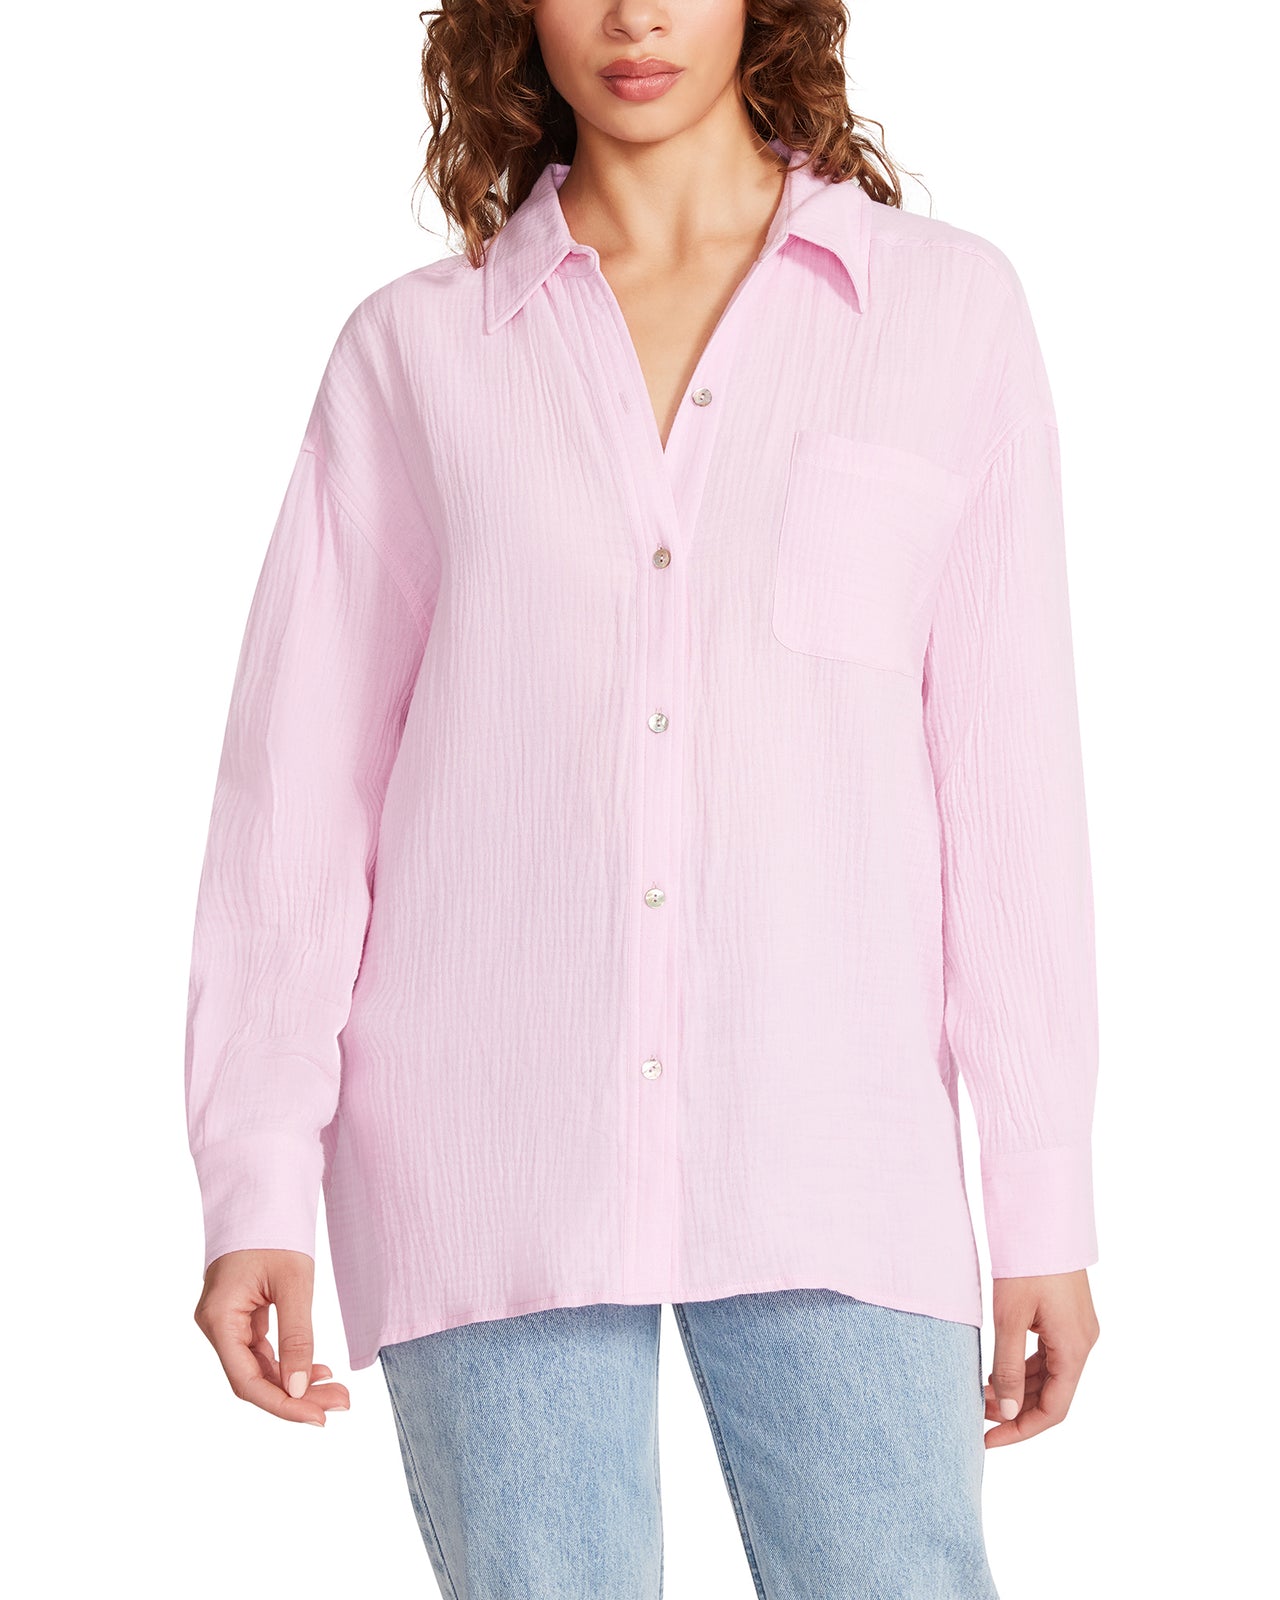 Blanca Pink Collar Neck Long Sleeve, Long Blouse by Steve Madden | LIT Boutique